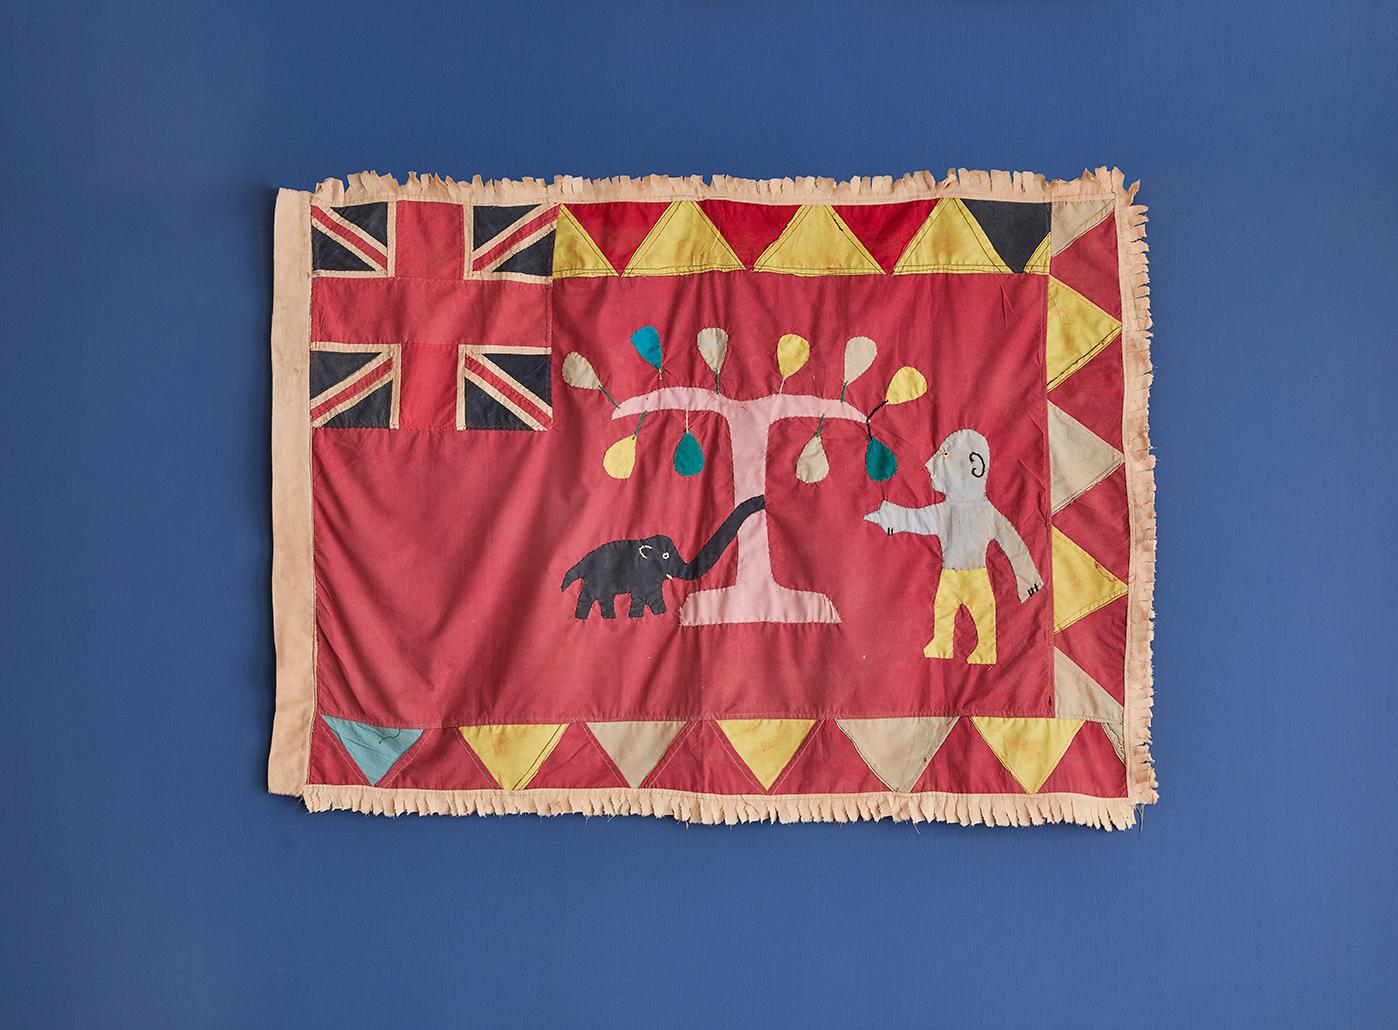 Vintage Asafo flag in cotton appliqué patterns, dating from the late 1940s, pre-independence in 1957. This example represents 'the Tree of Wisdom'. The Elephant commonly represents wisdom and longevity in many African cultures.

The colourful